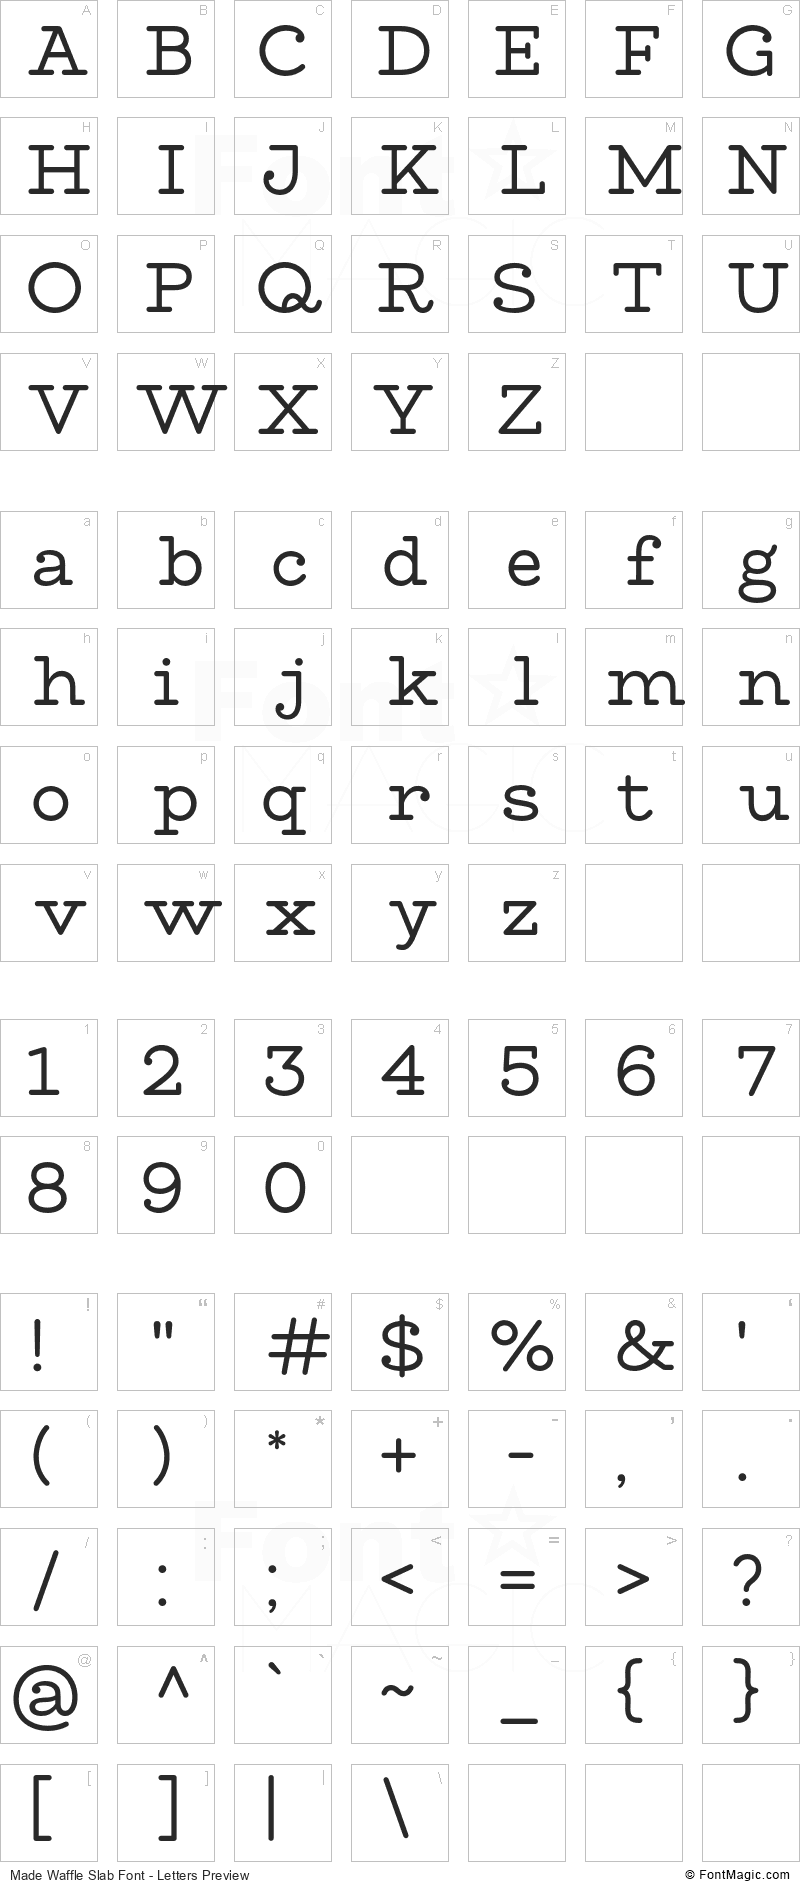 Made Waffle Slab Font - All Latters Preview Chart